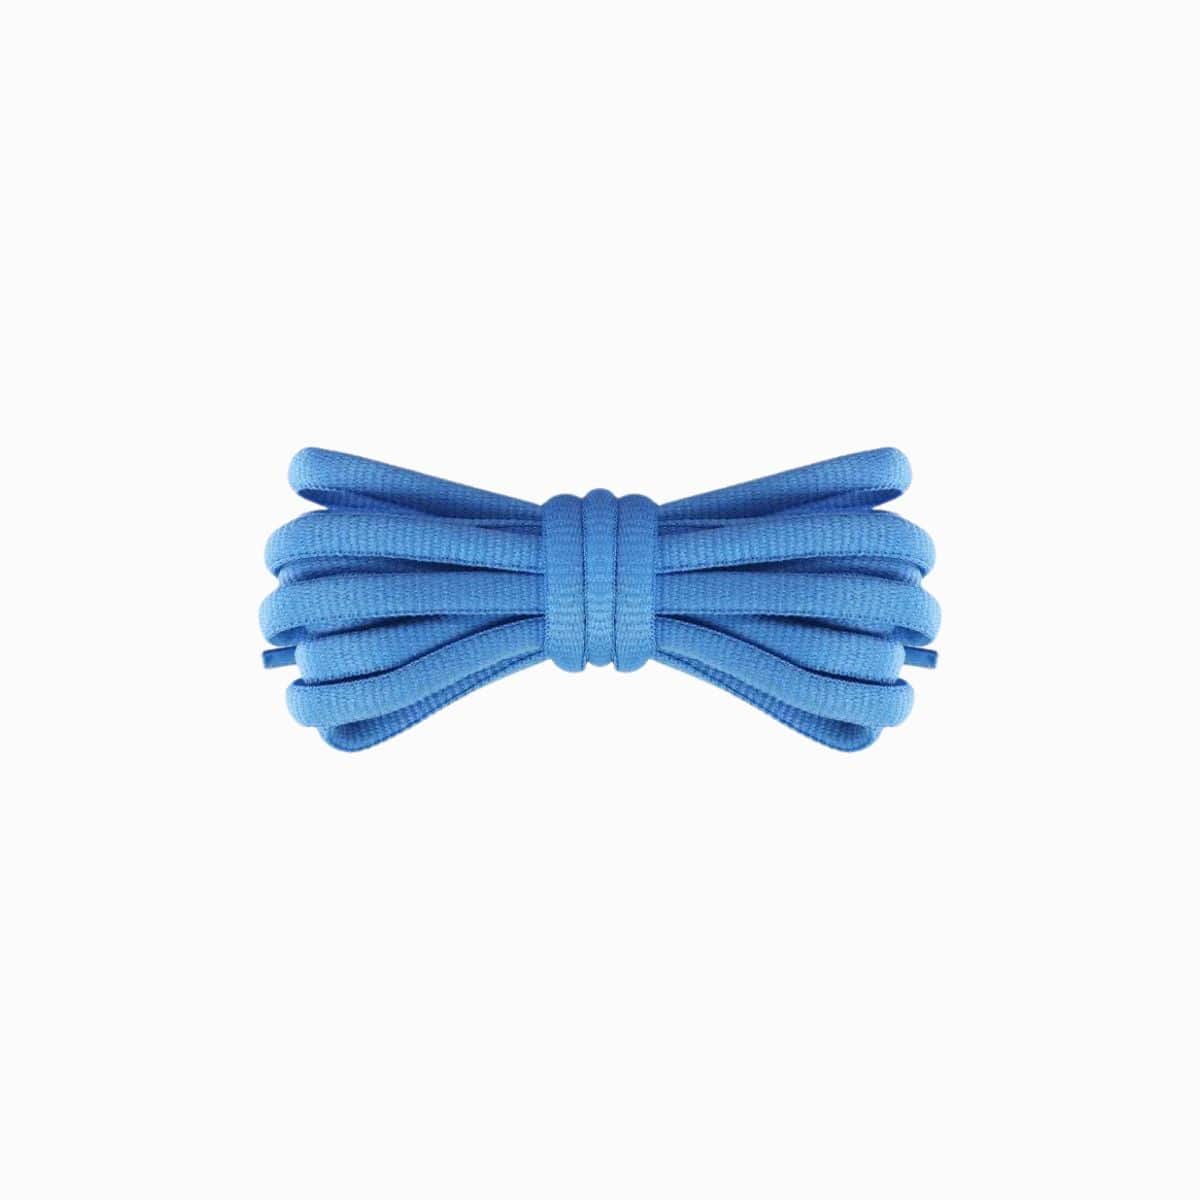 Nike_TN_Replacement_Shoelaces_Sky_Blue